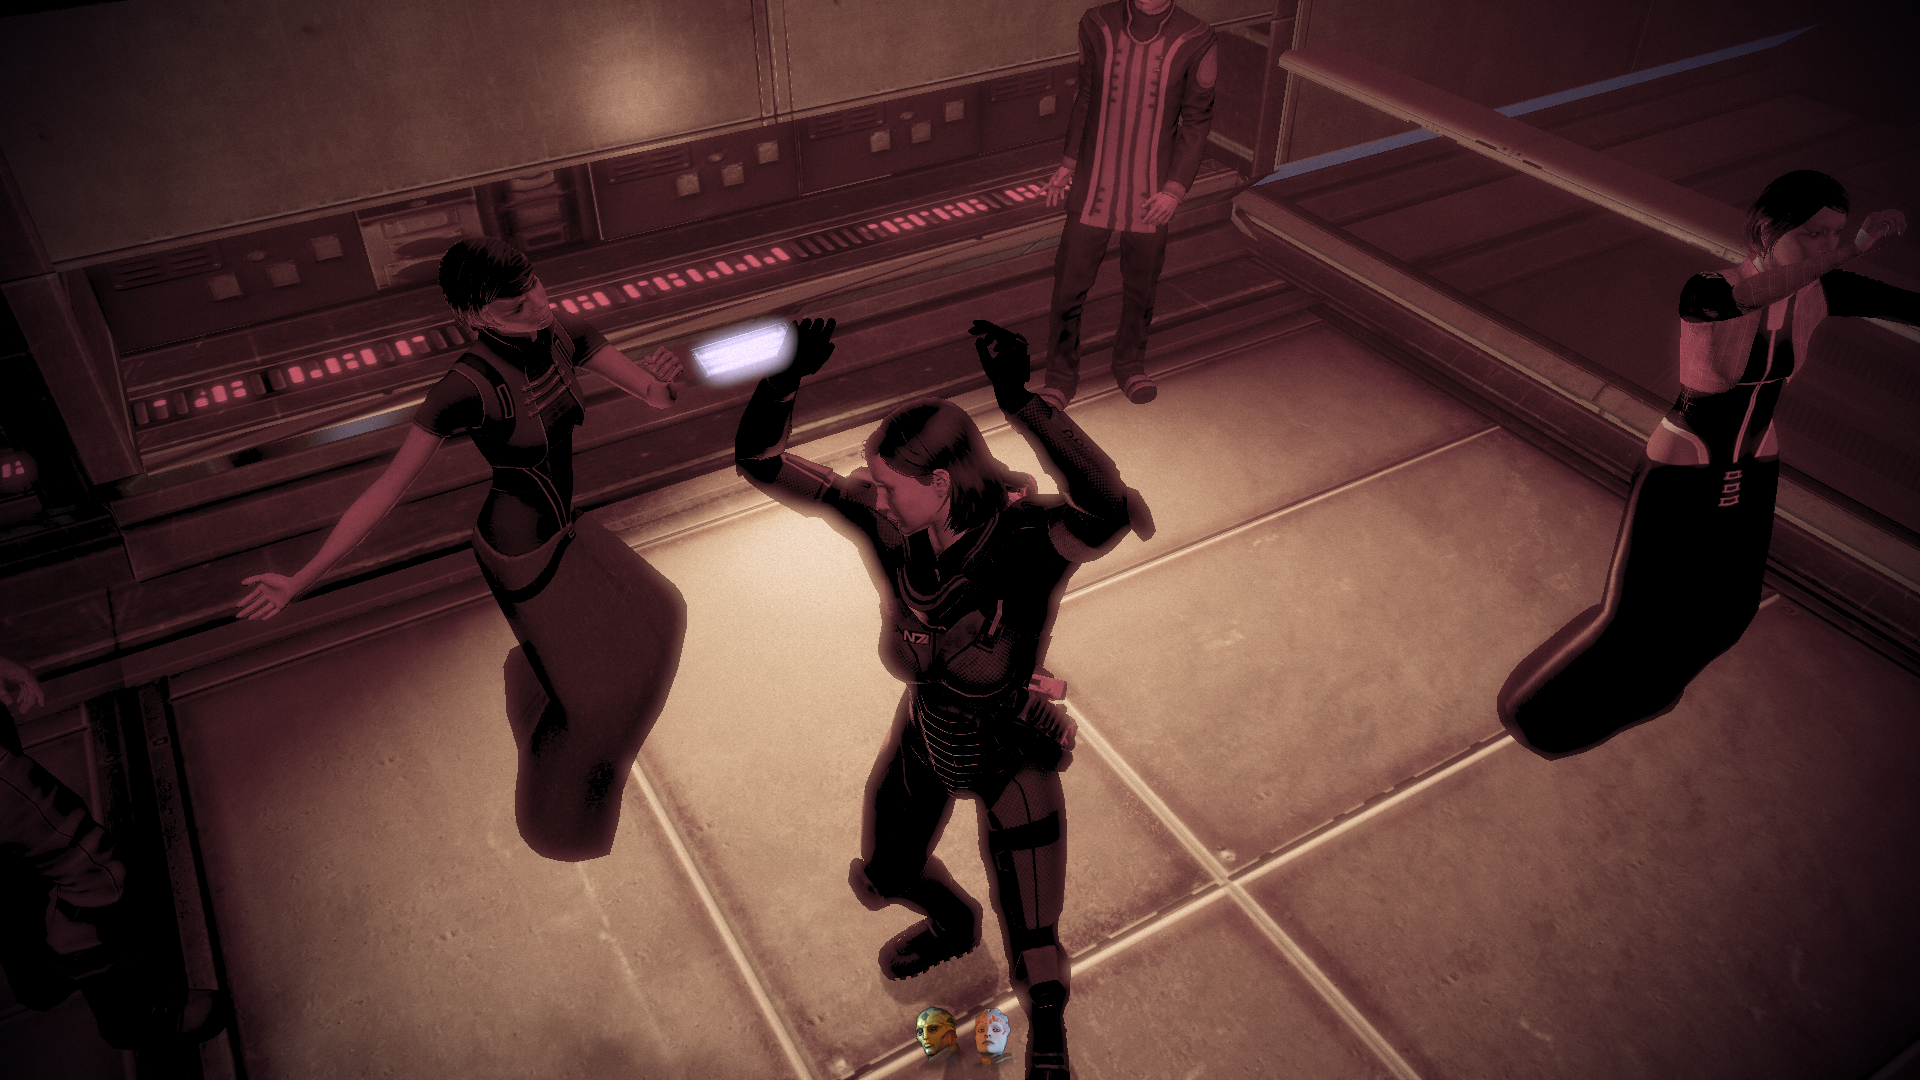 shepard dancing is the mood of march 2020